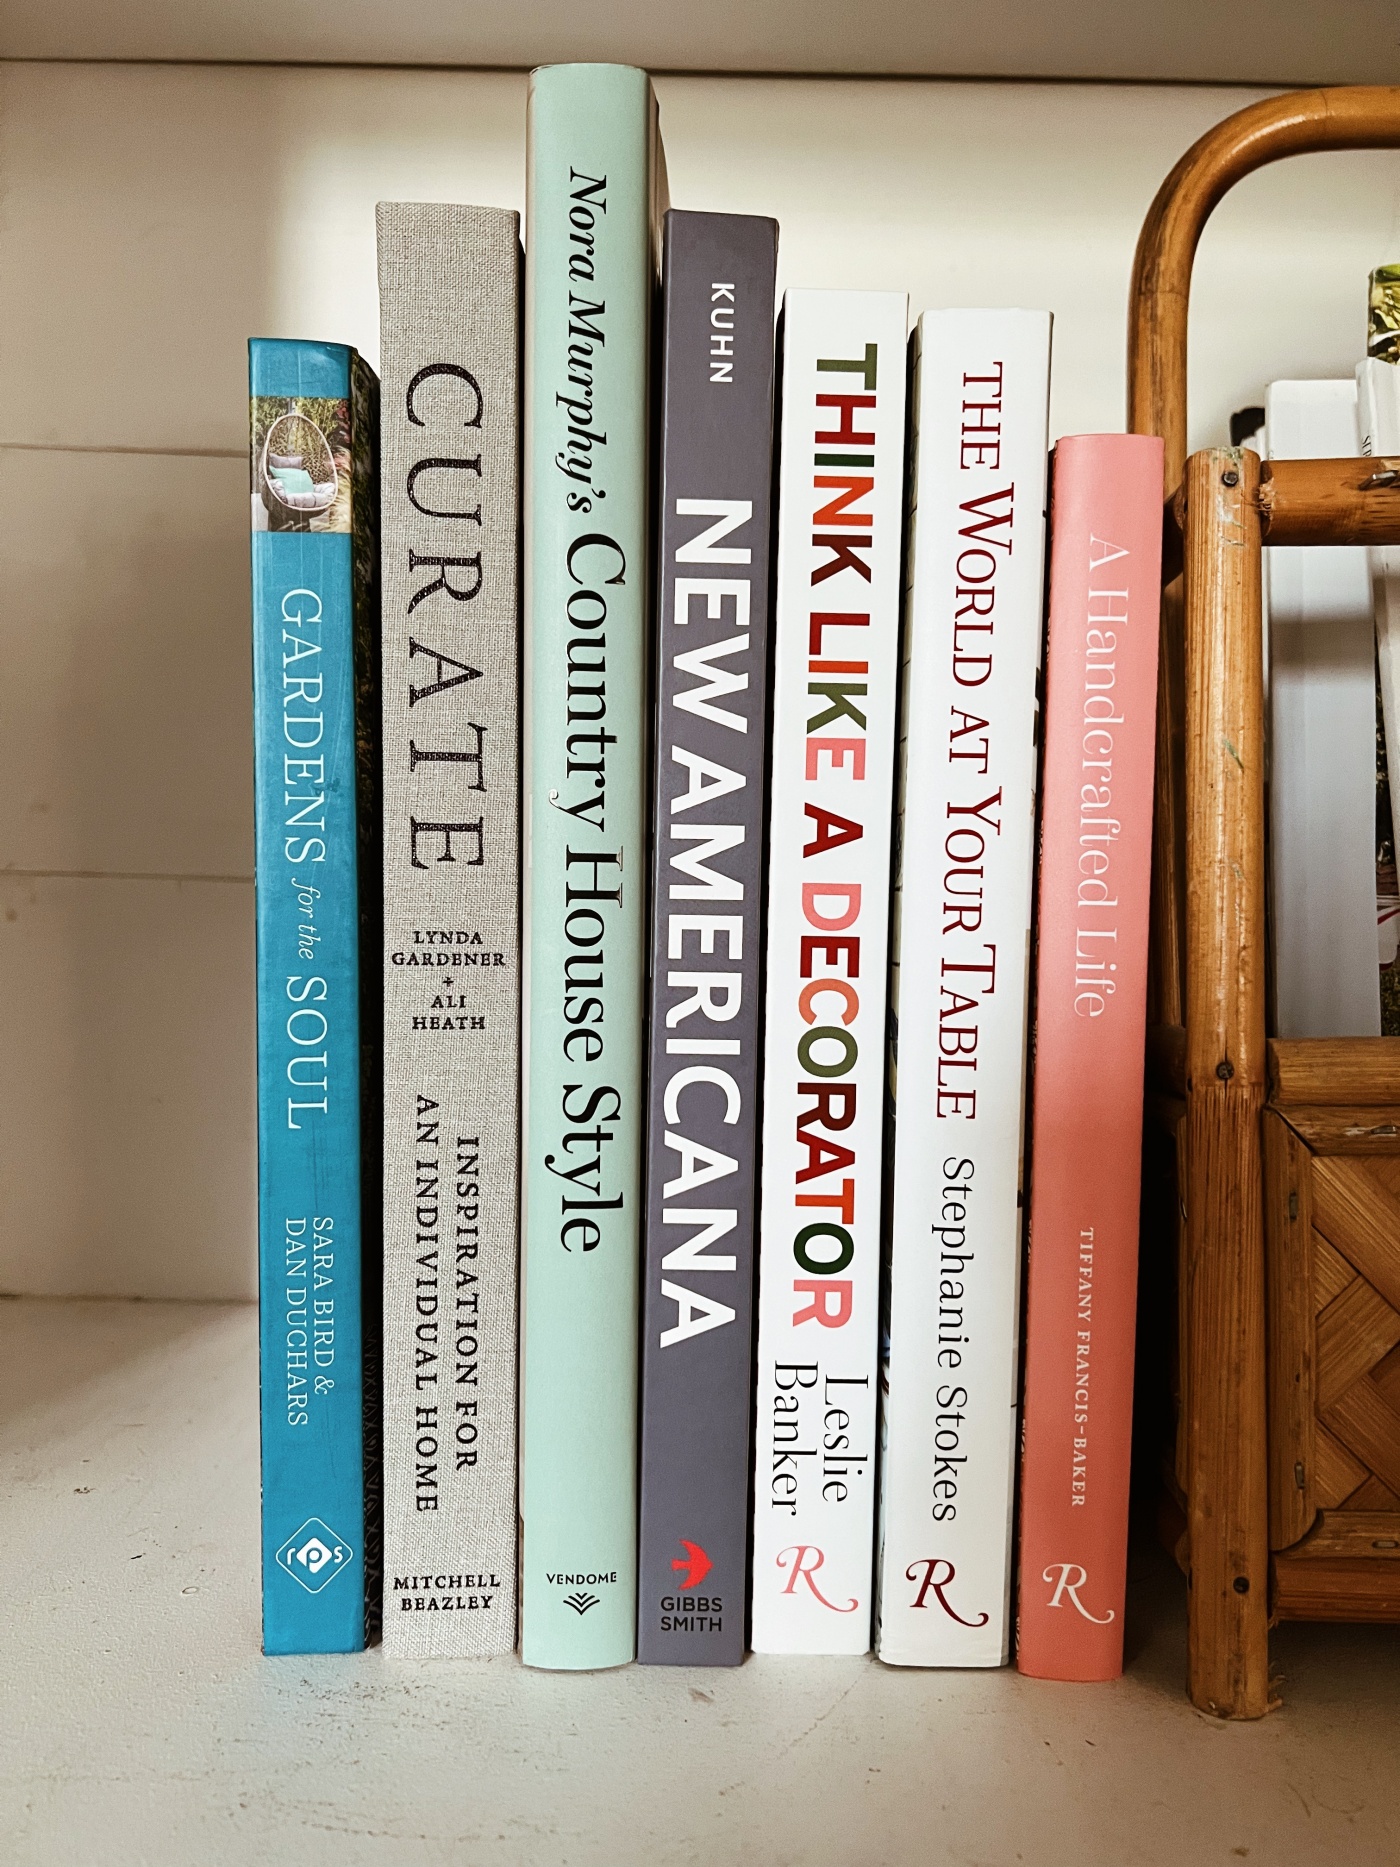 7 Home Decorating Books I added to my collection.